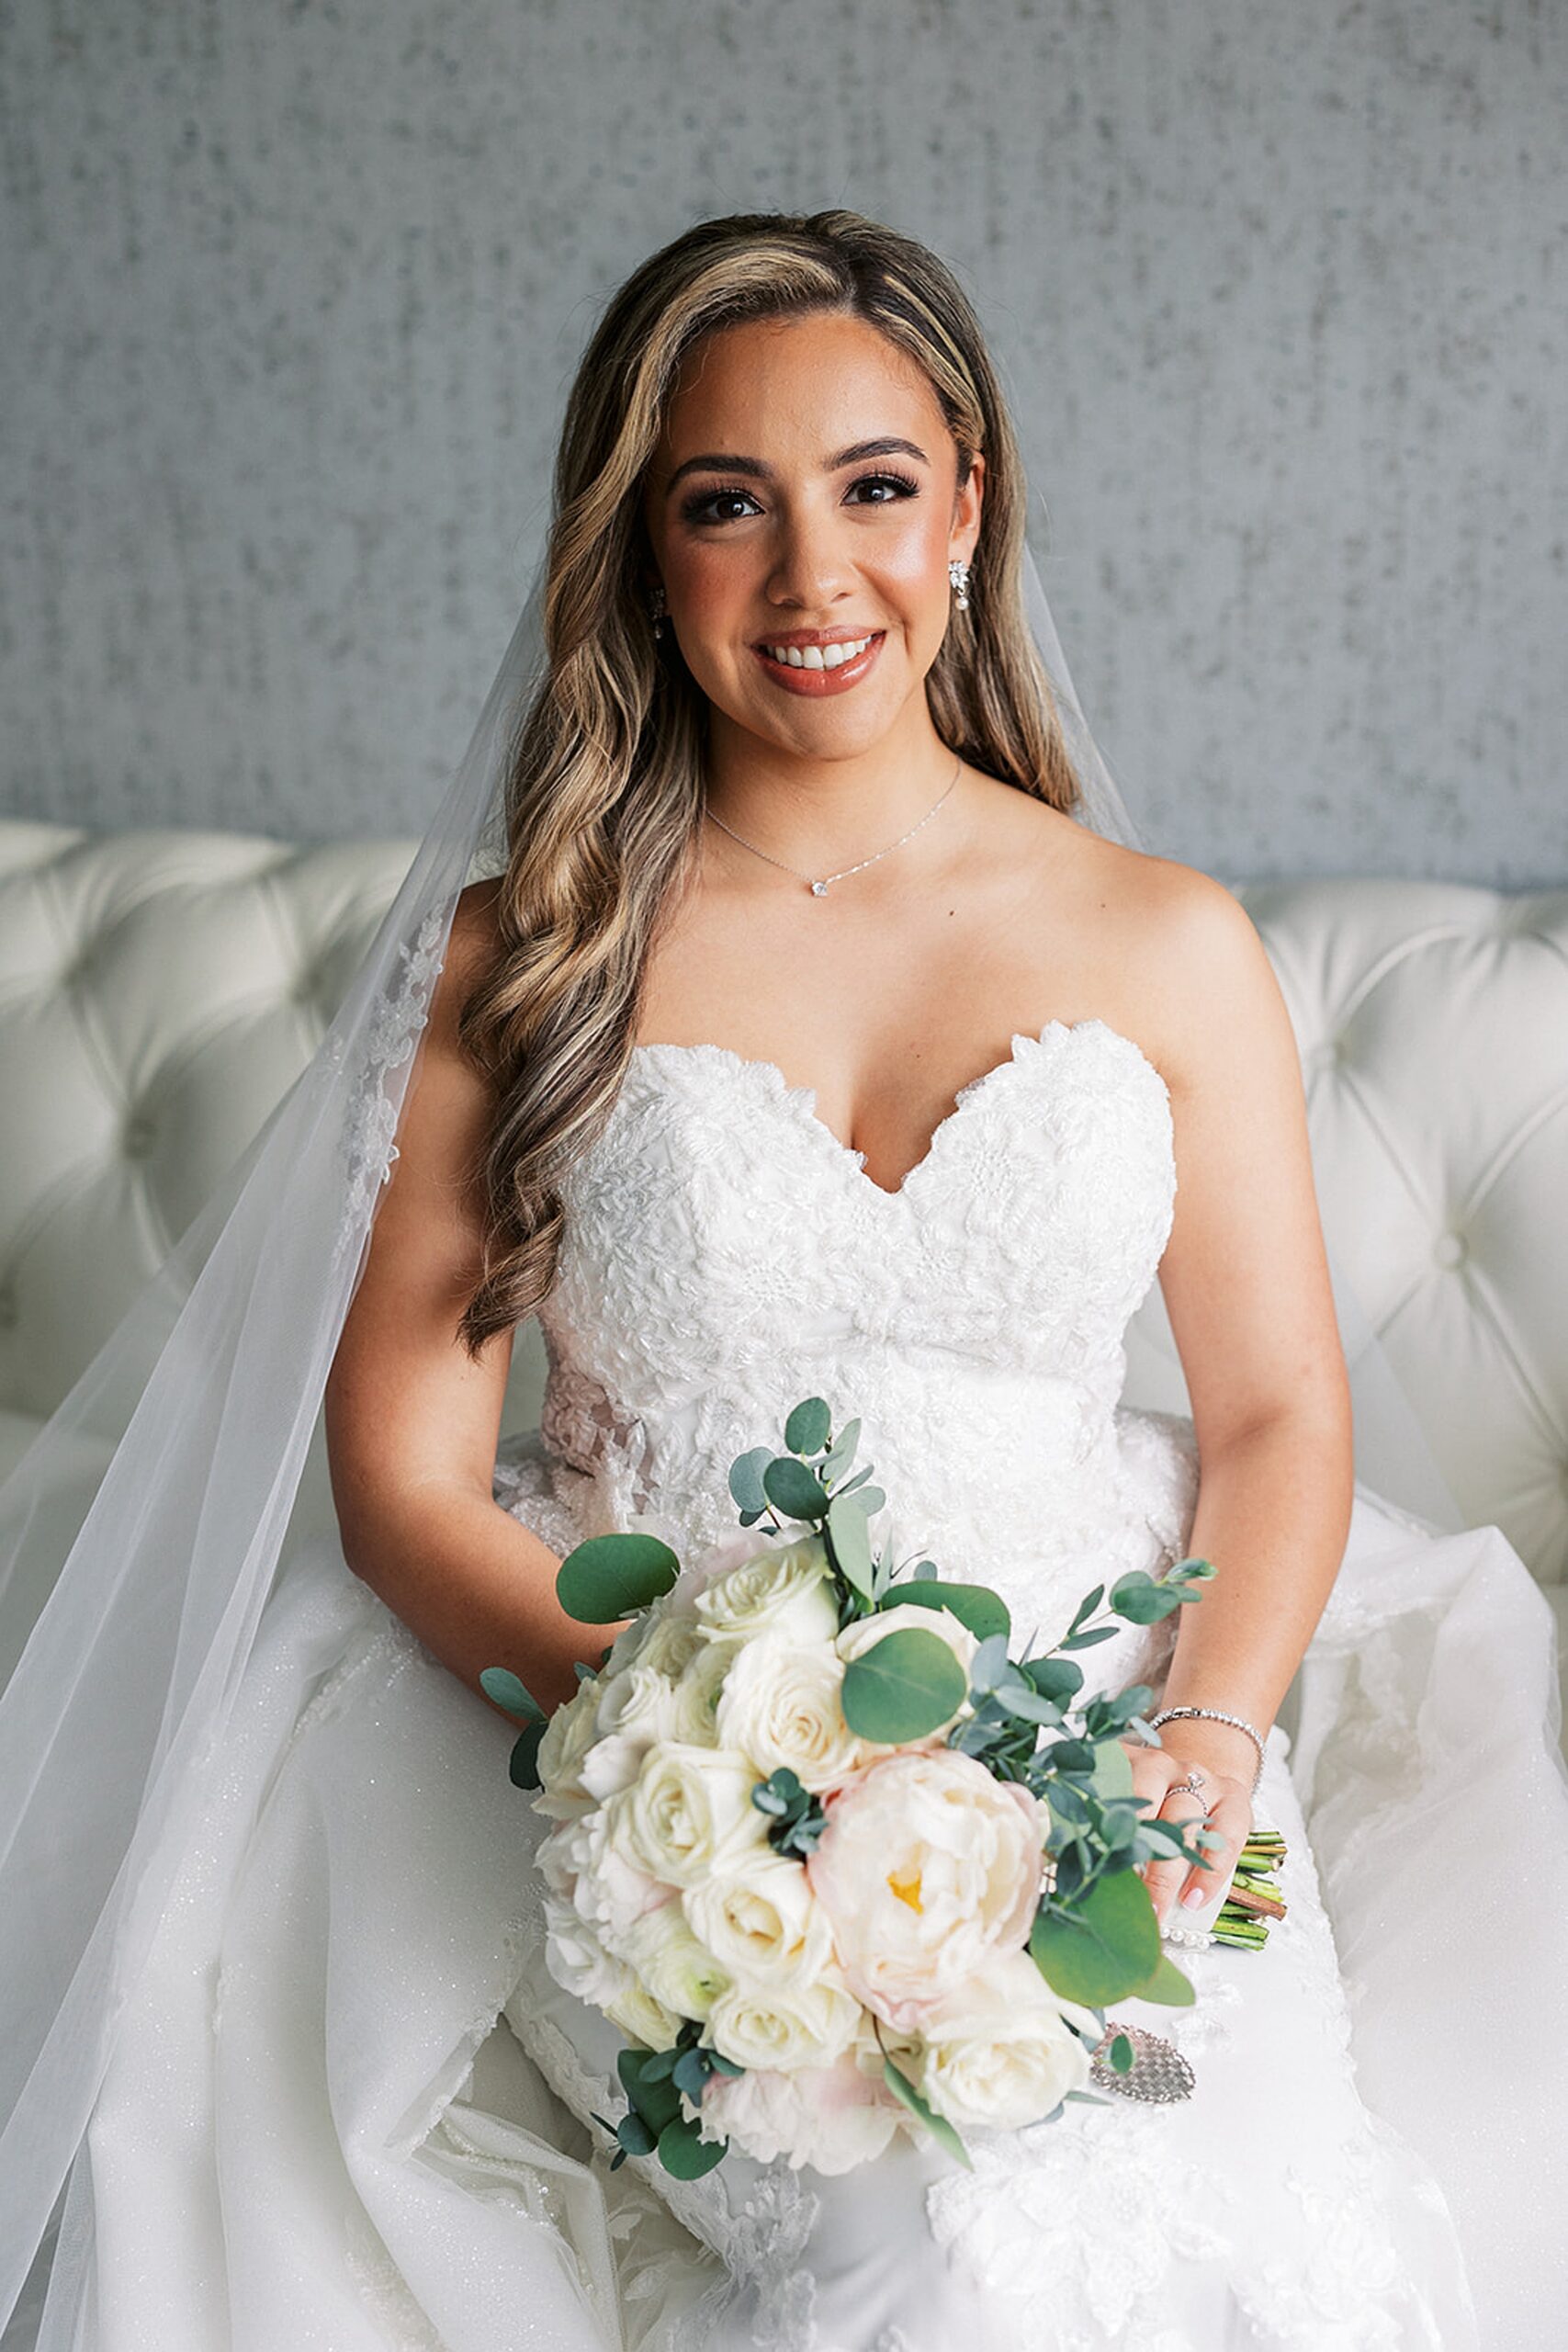 A bride sits on a couch in a white lace embroidered dress holding her white rose bouquet